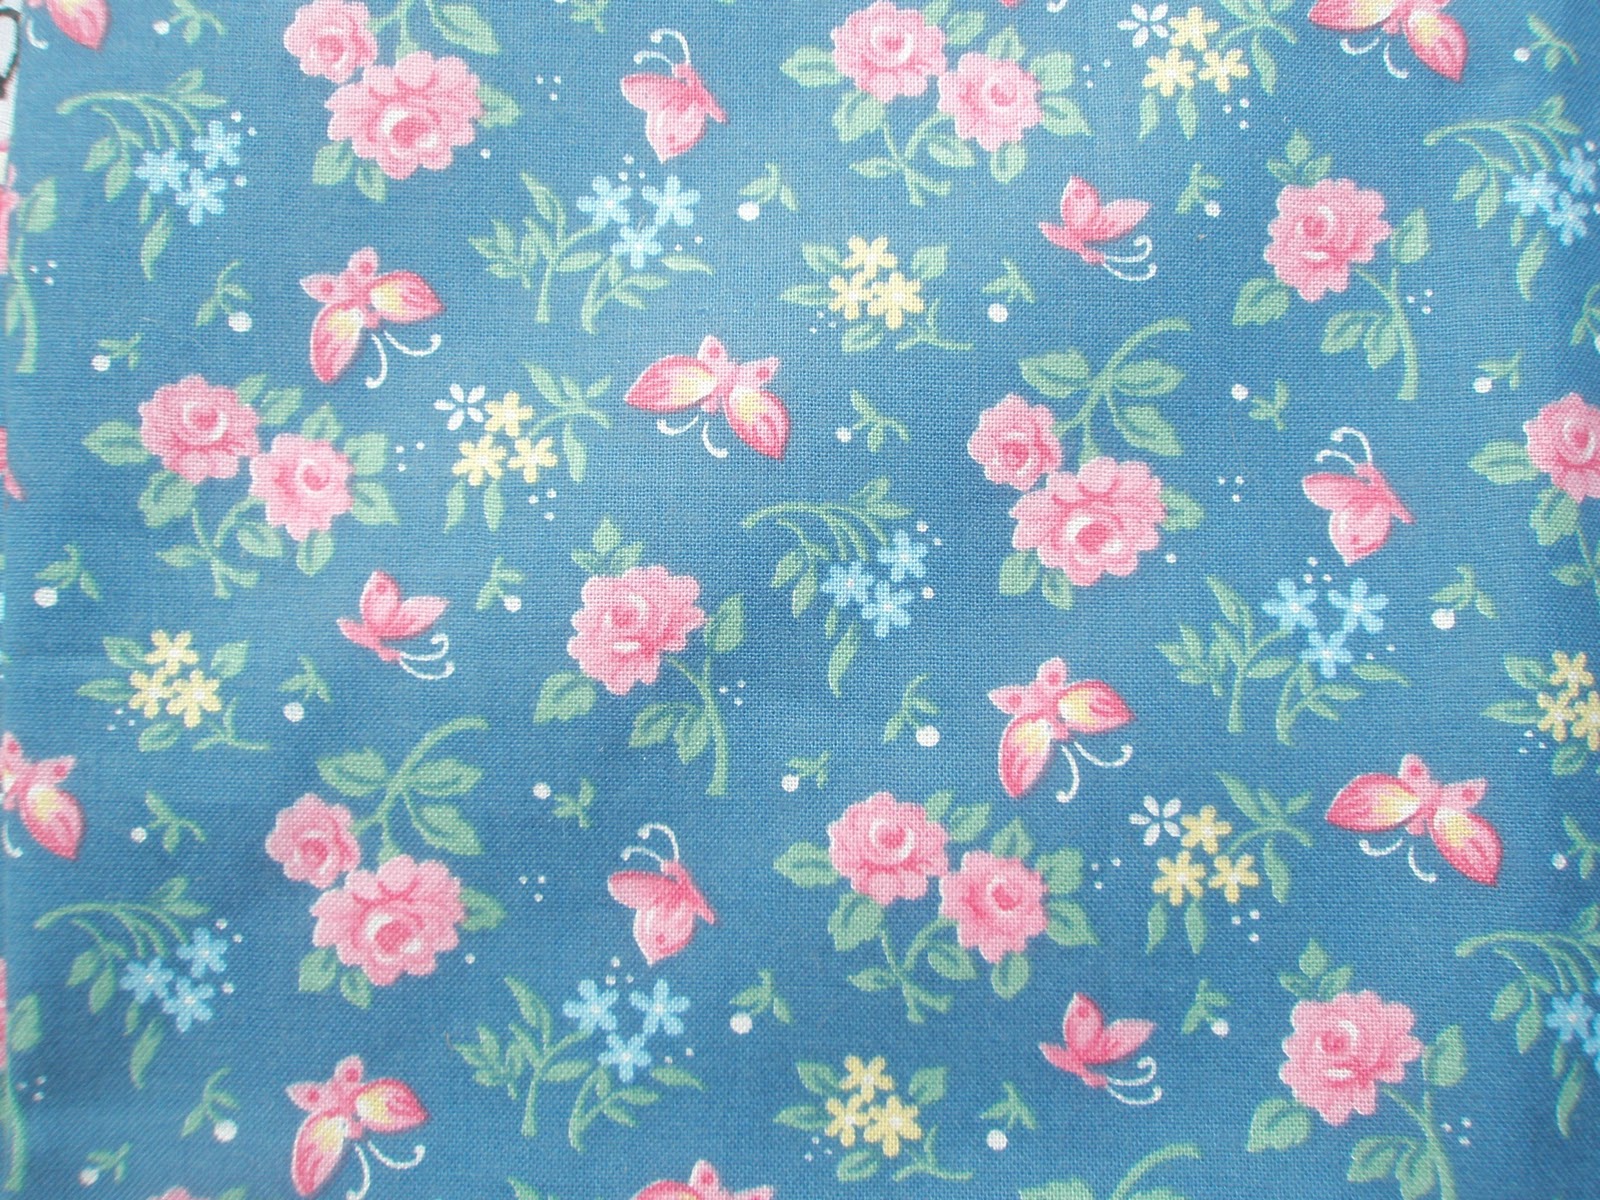 flower backgrounds ws0hfurn Blue Flowers wallpapers